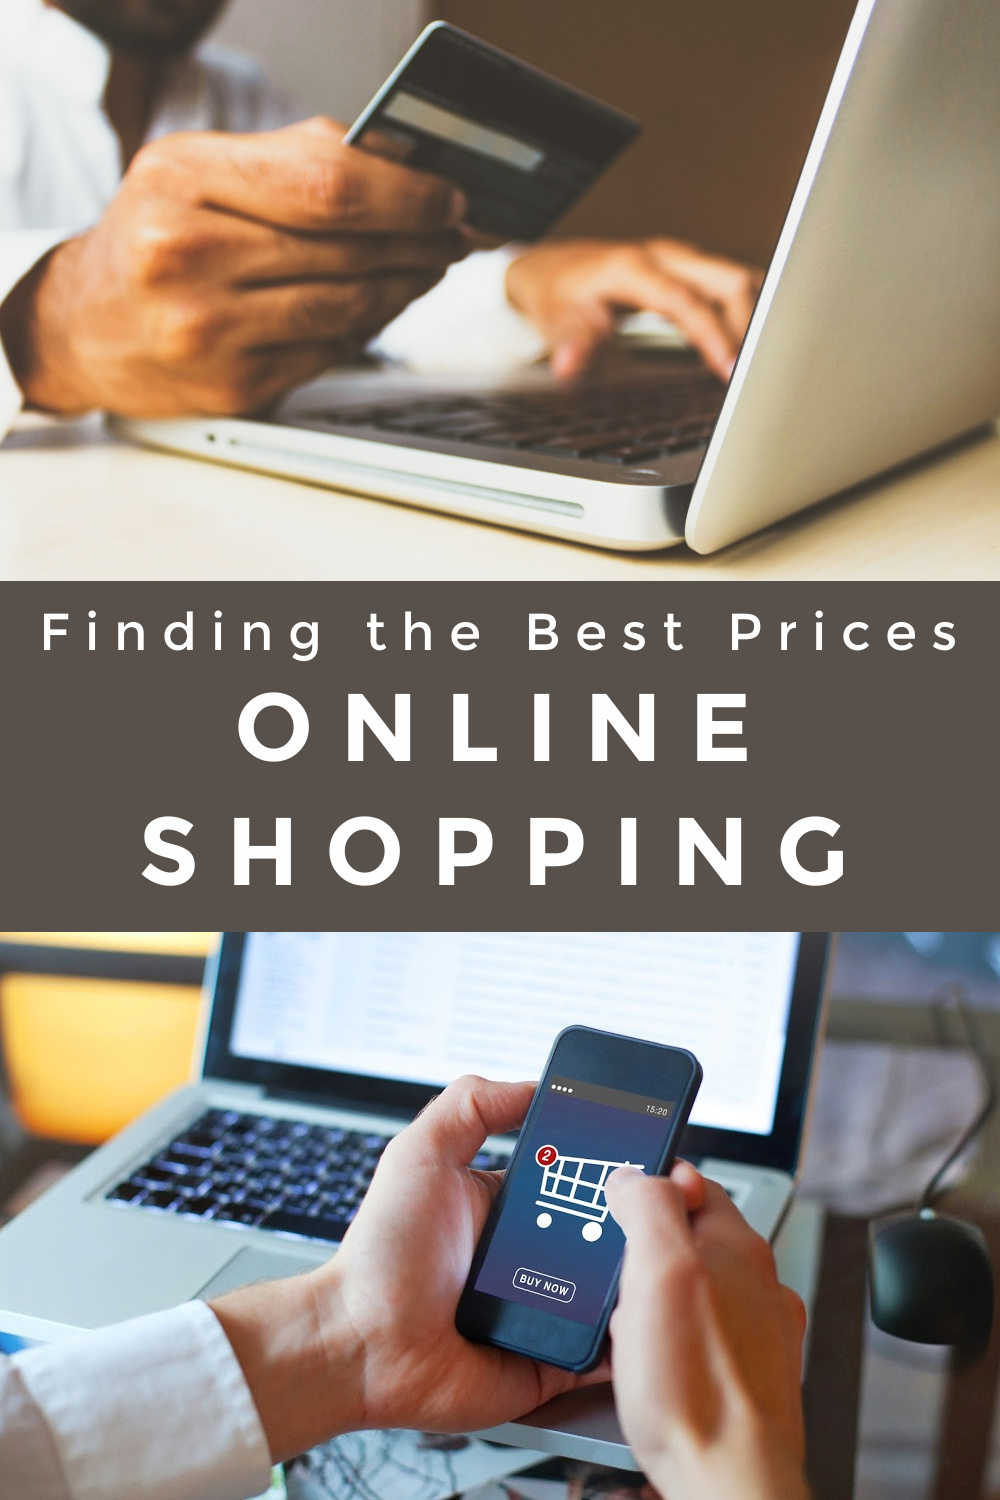 How to Find the Best Prices While Online Shopping